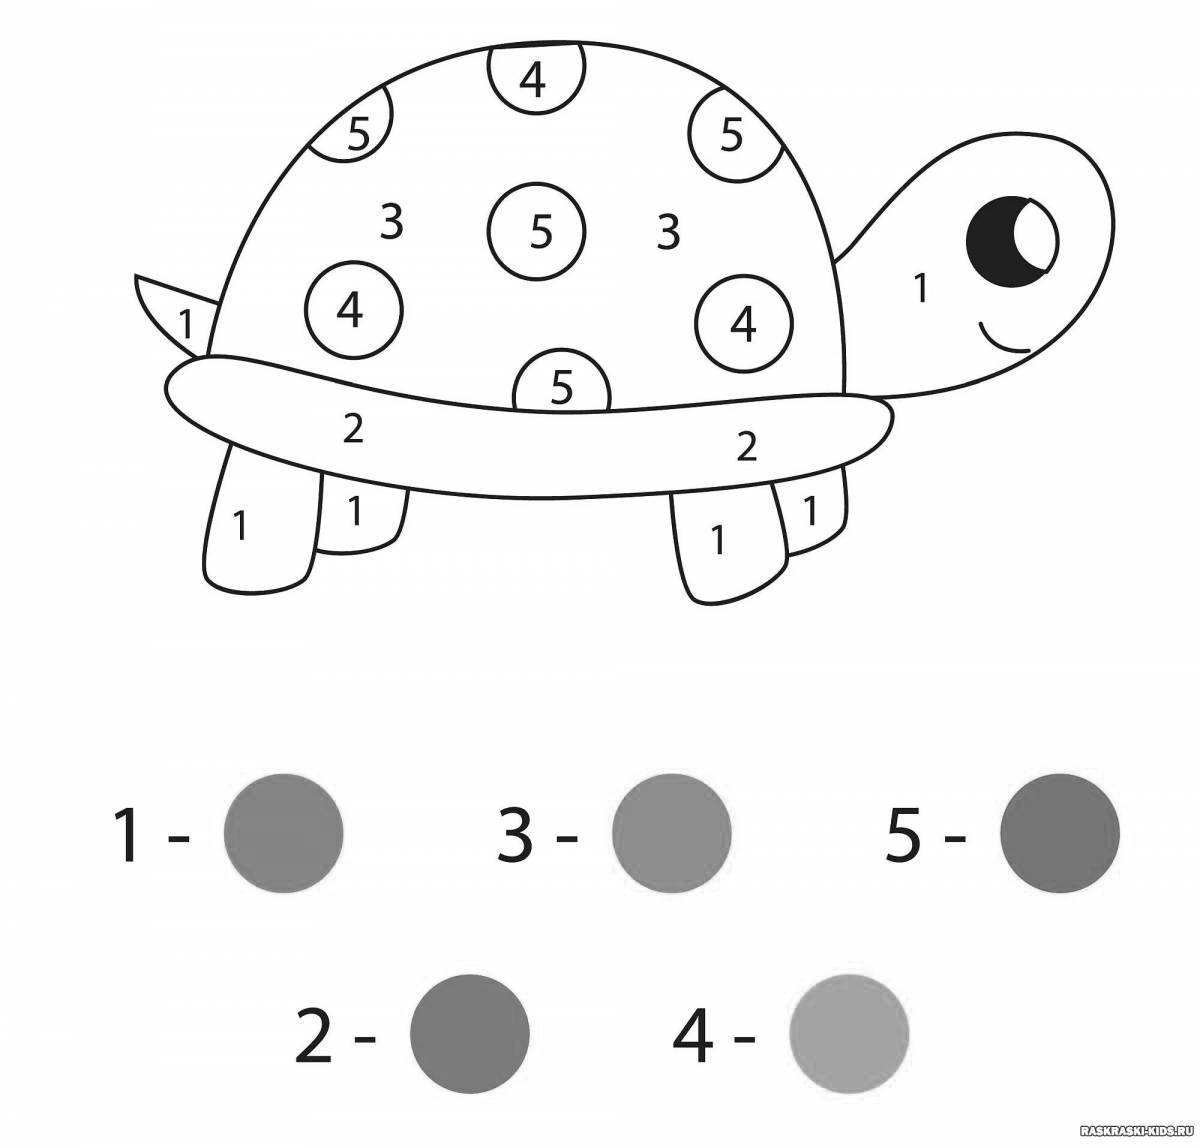 By numbers for kids game #7